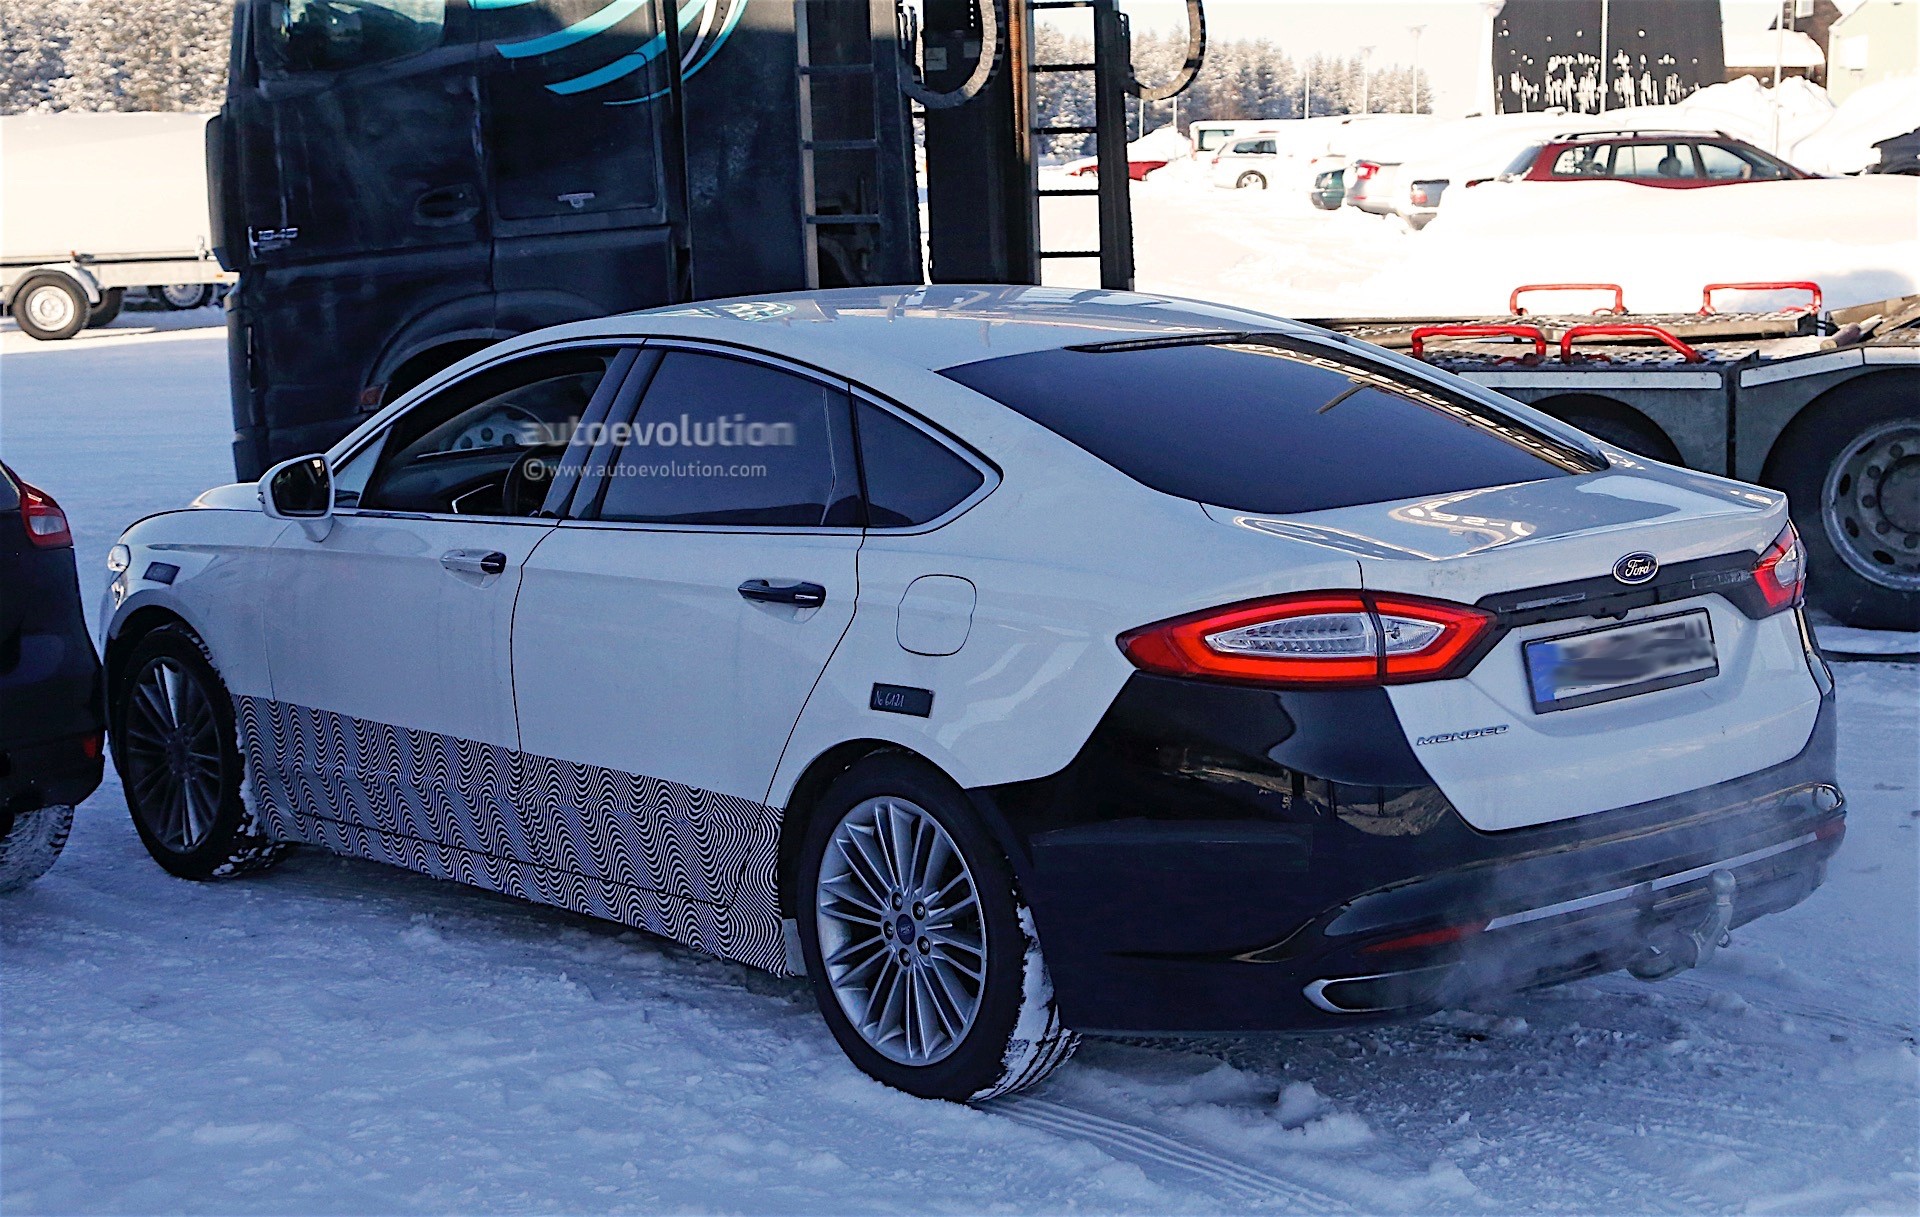 2014 Ford Fusion Reviews, Ratings, Prices - Consumer Reports